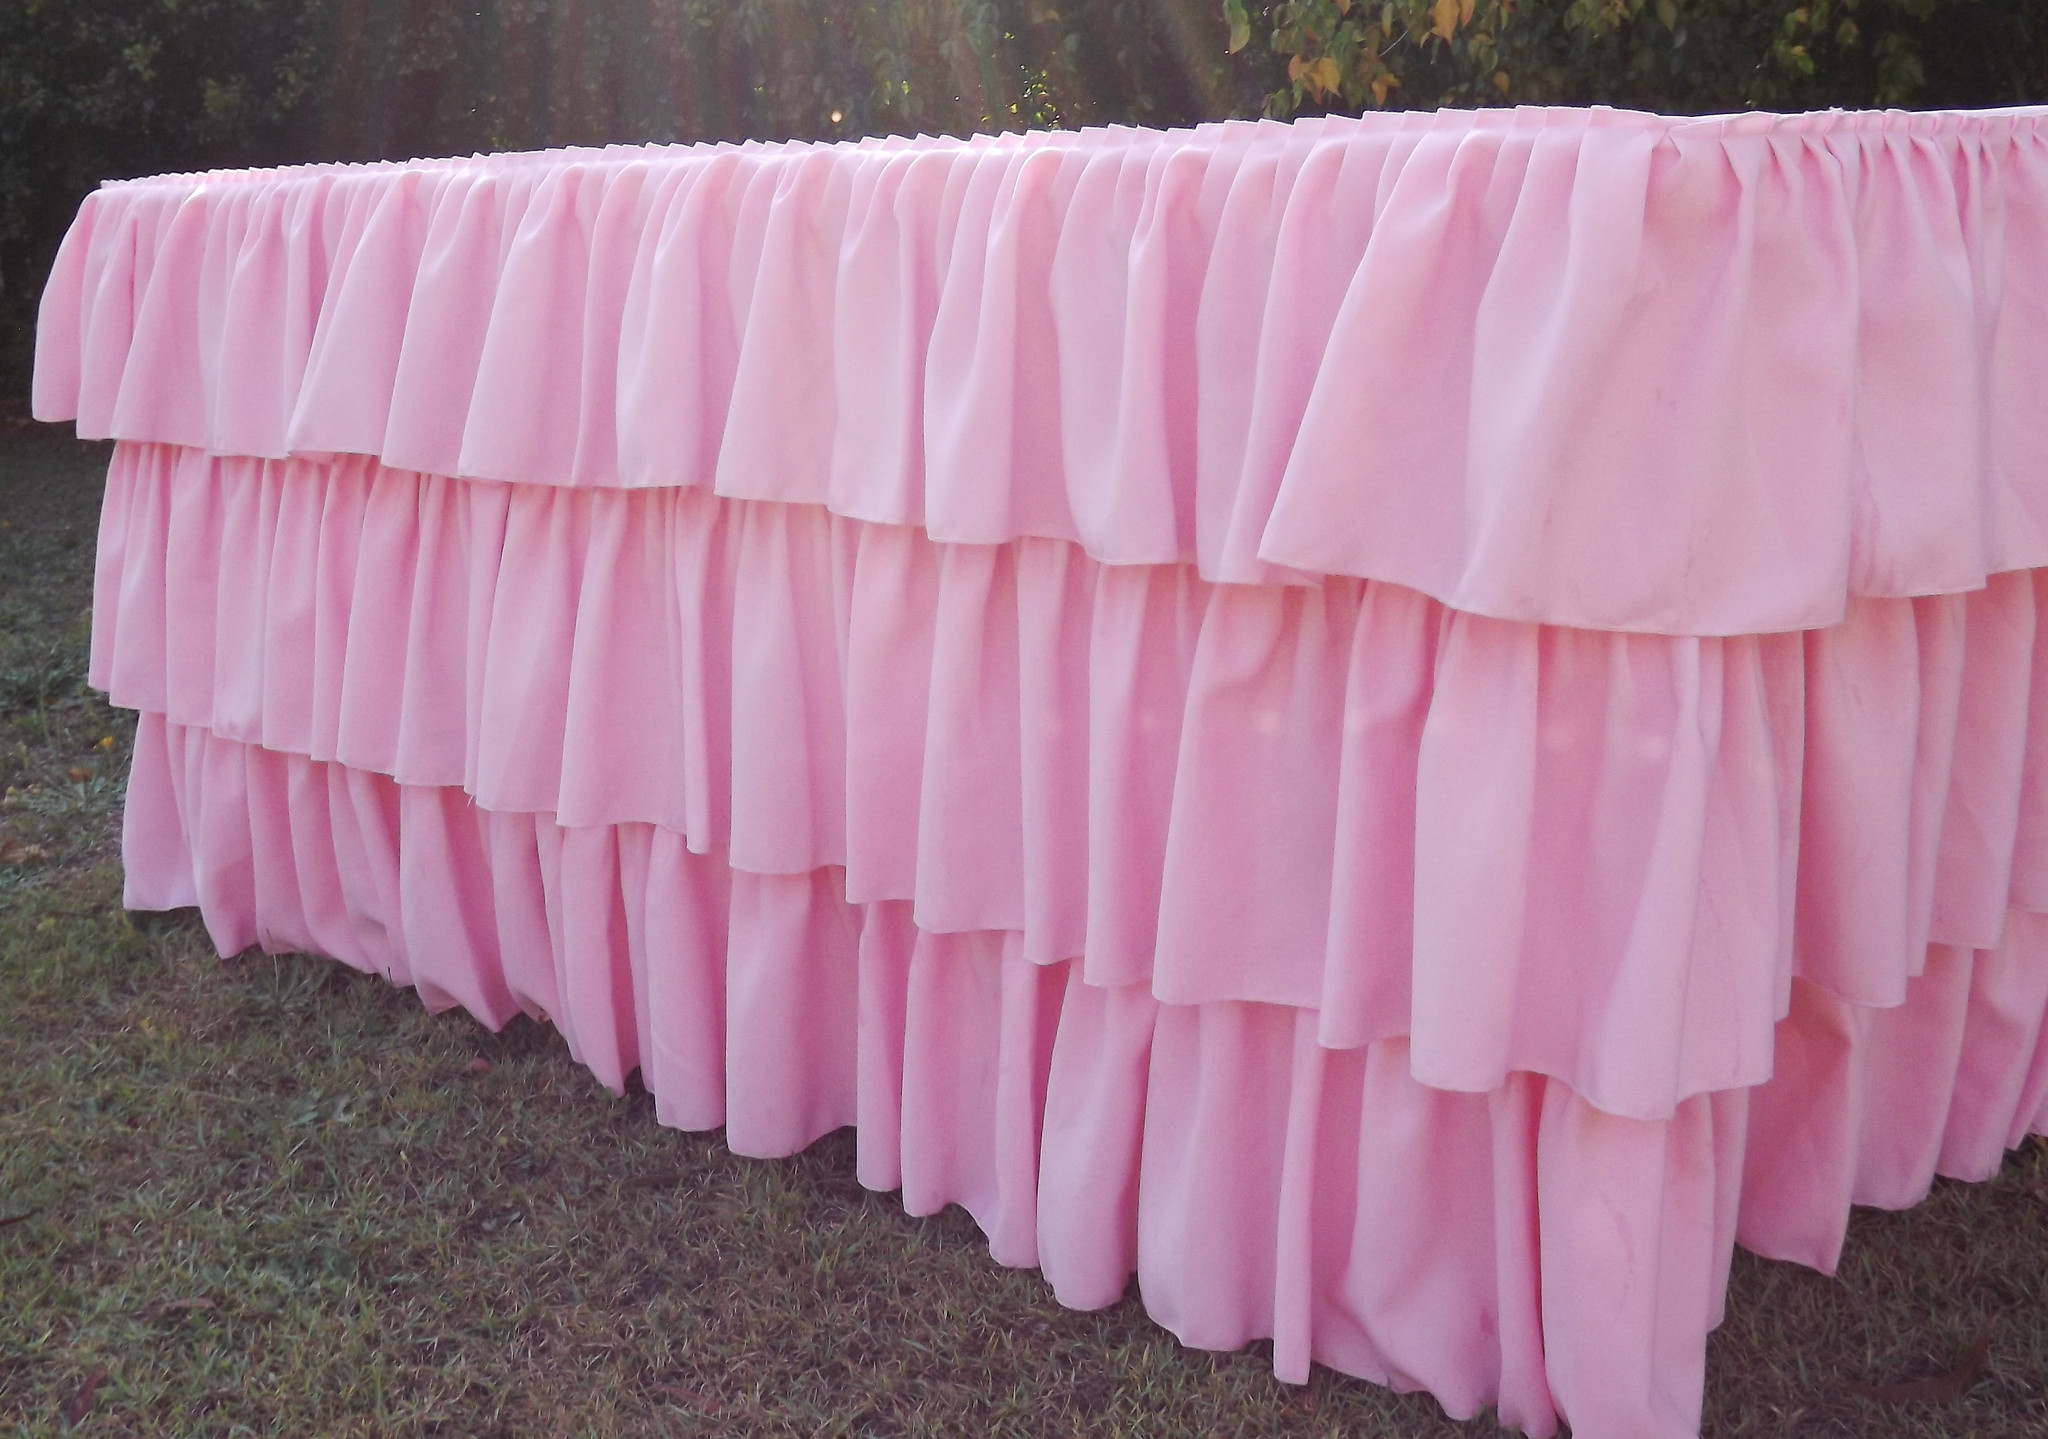 Pink ruffled tablecloth for hire (or purchase) - Saffy and May (Qld)